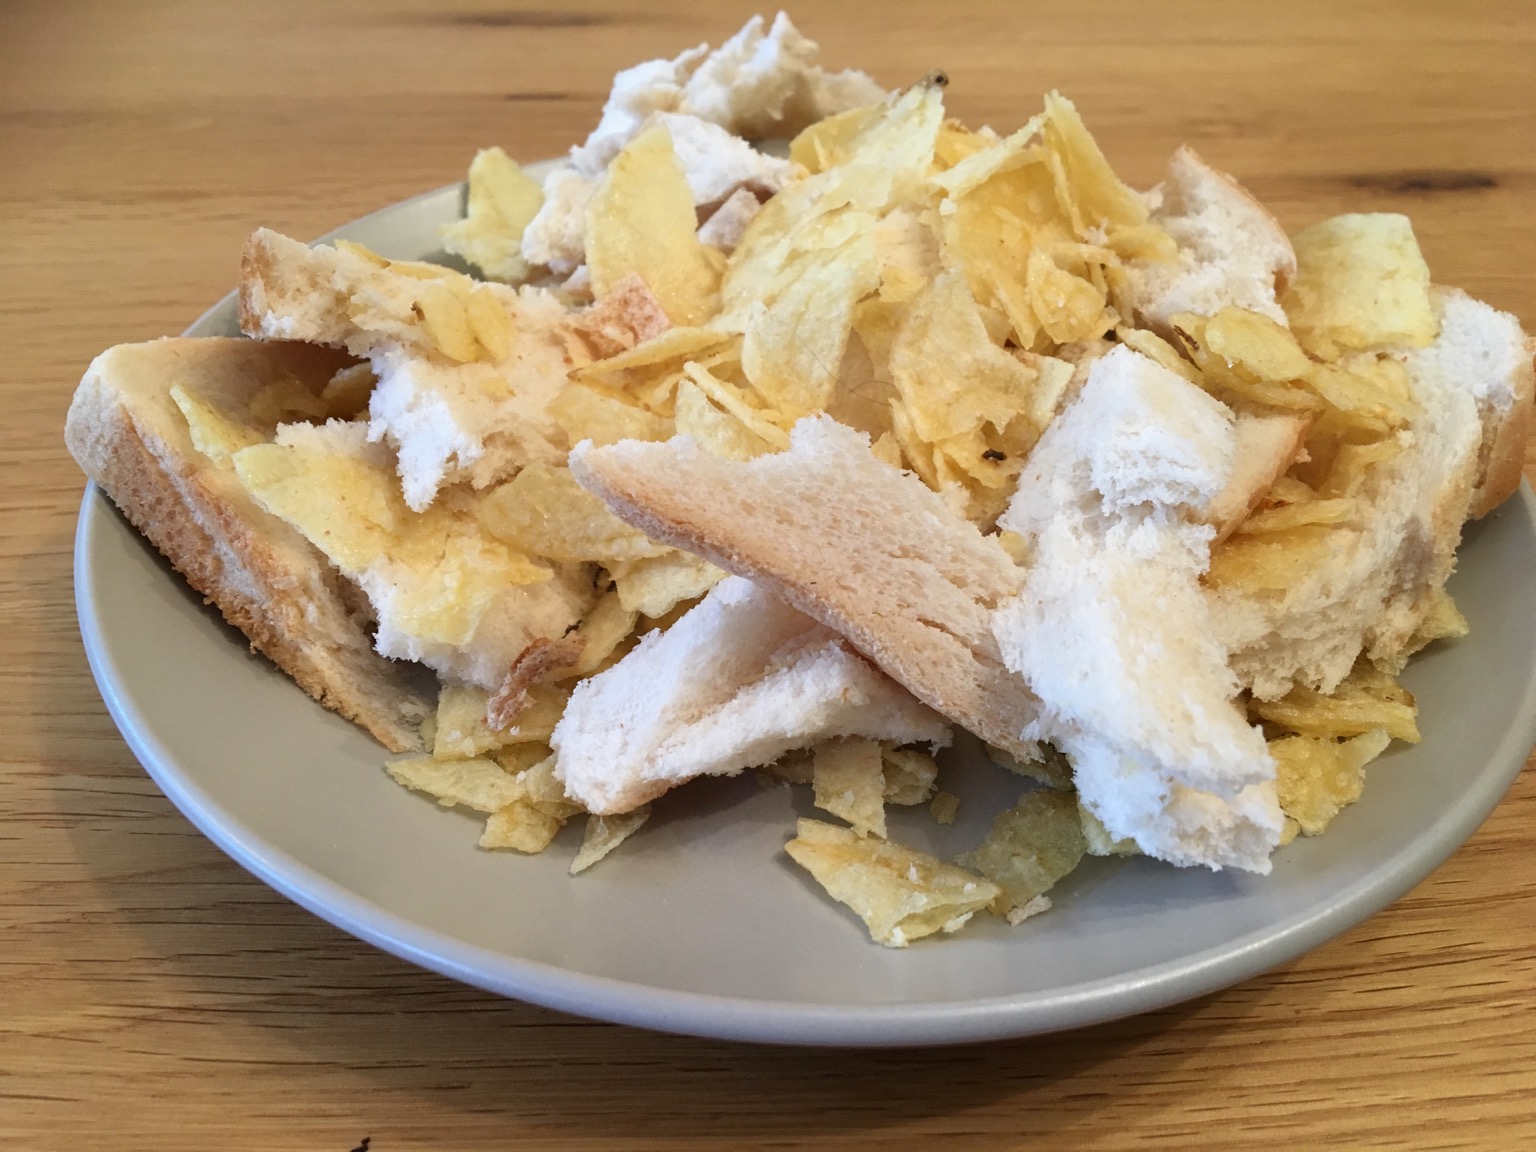 Torn bread and crisps heaped on a plate